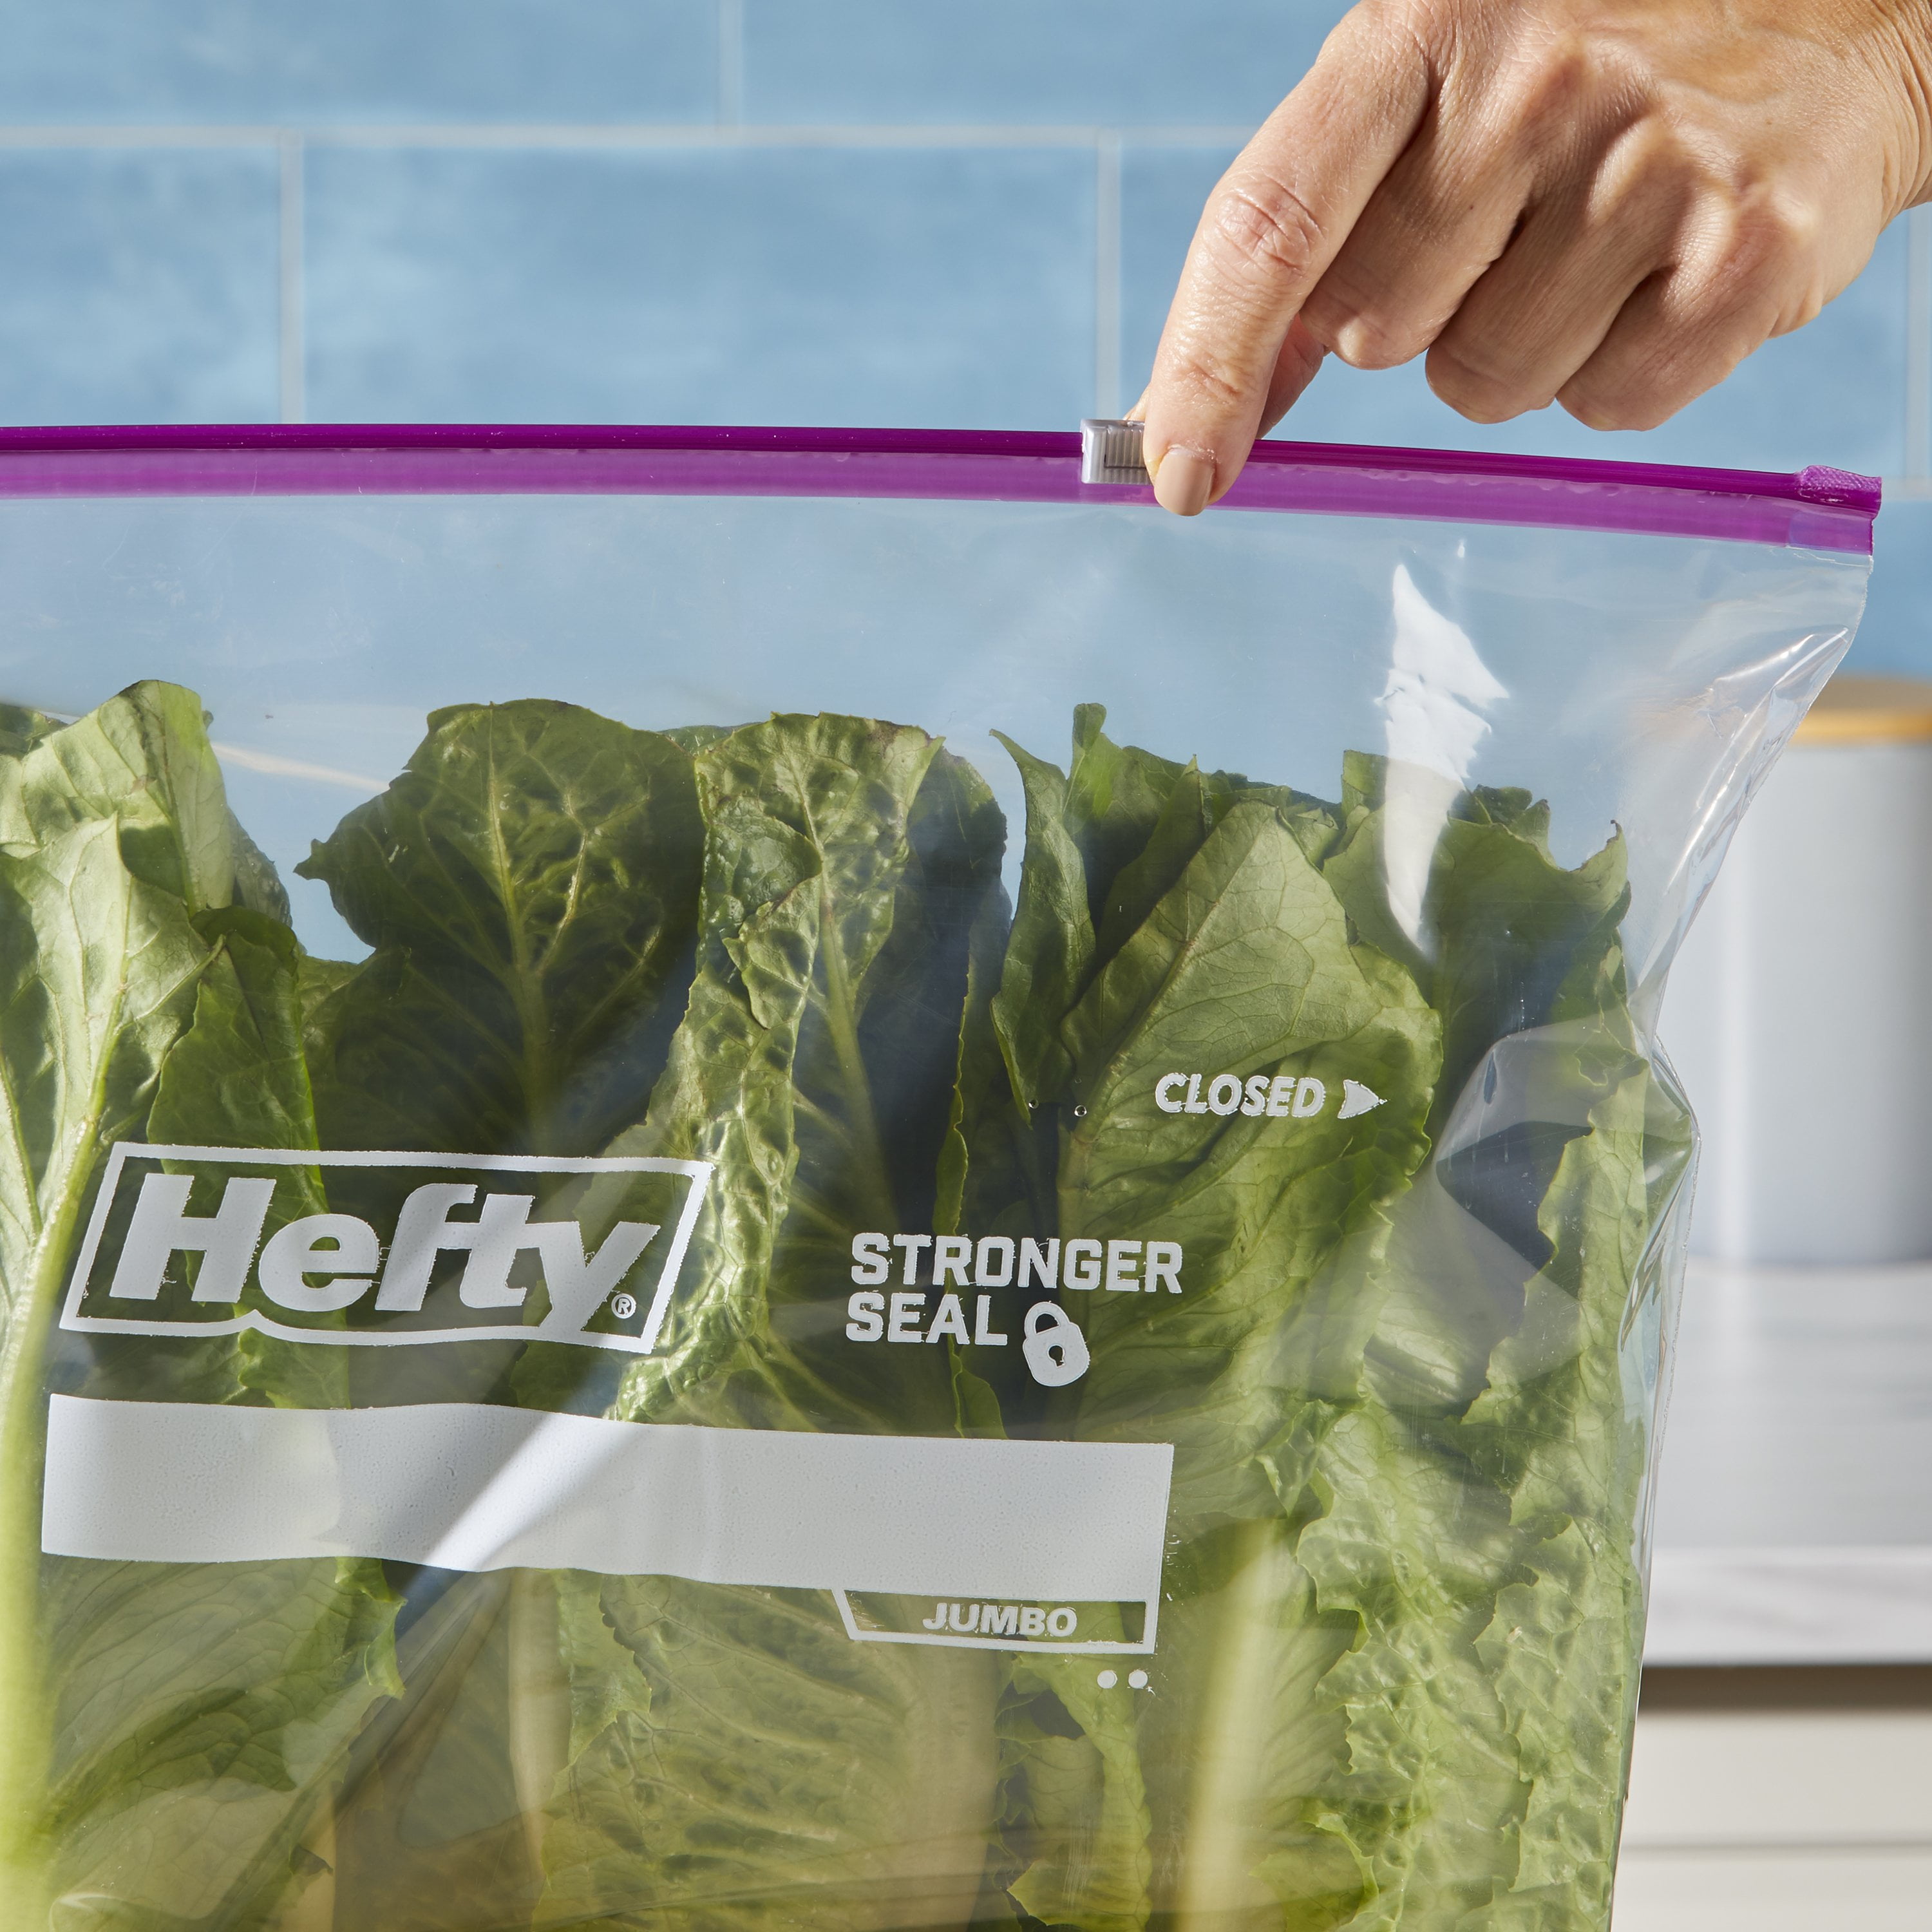 Hefty Slider Jumbo Storage Plastic Bags - 2.5 Gallon Size, 3 Boxes of 15  Bags (45 Total) 